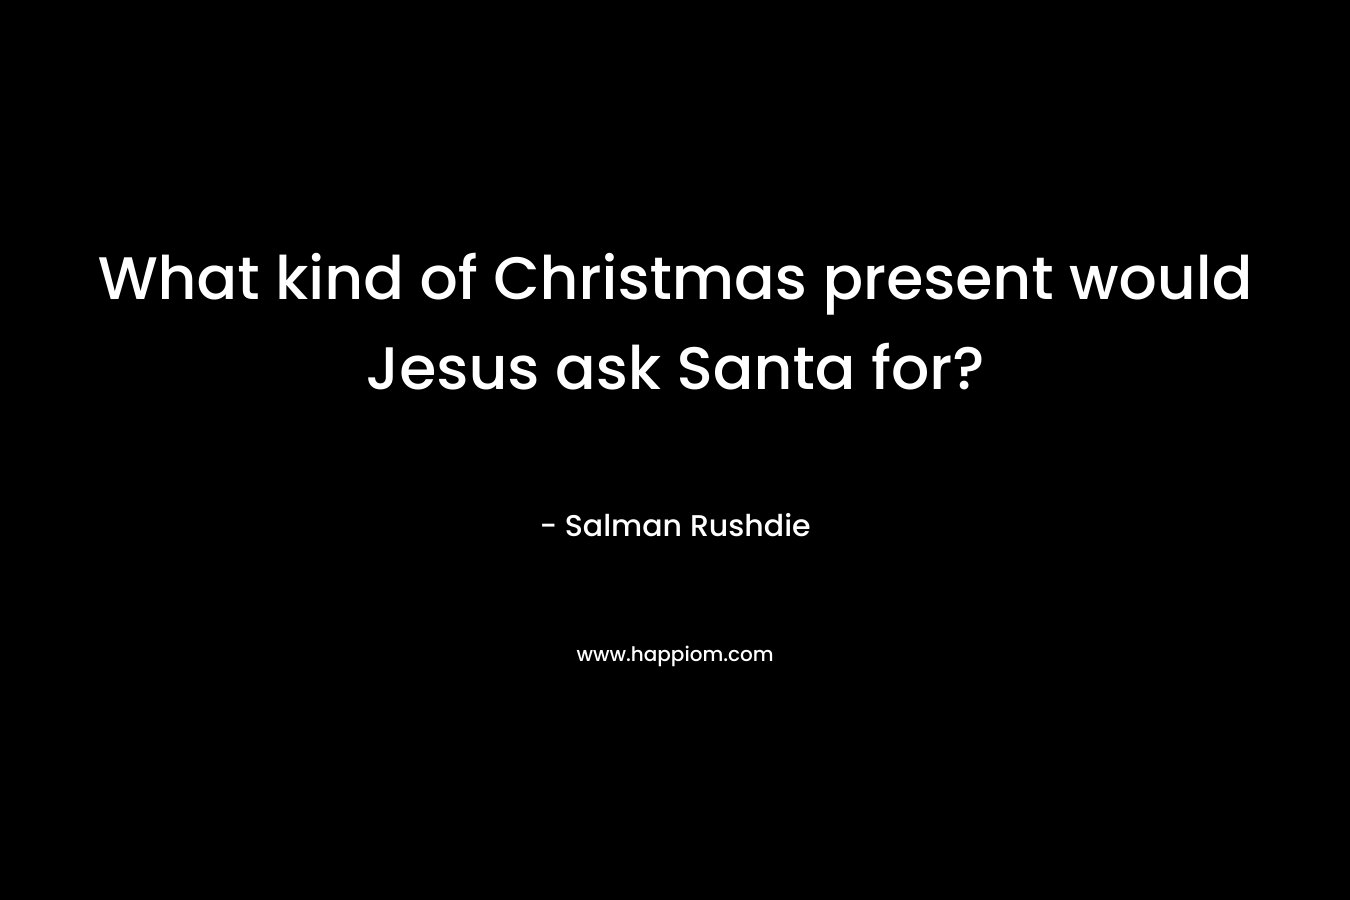 What kind of Christmas present would Jesus ask Santa for?